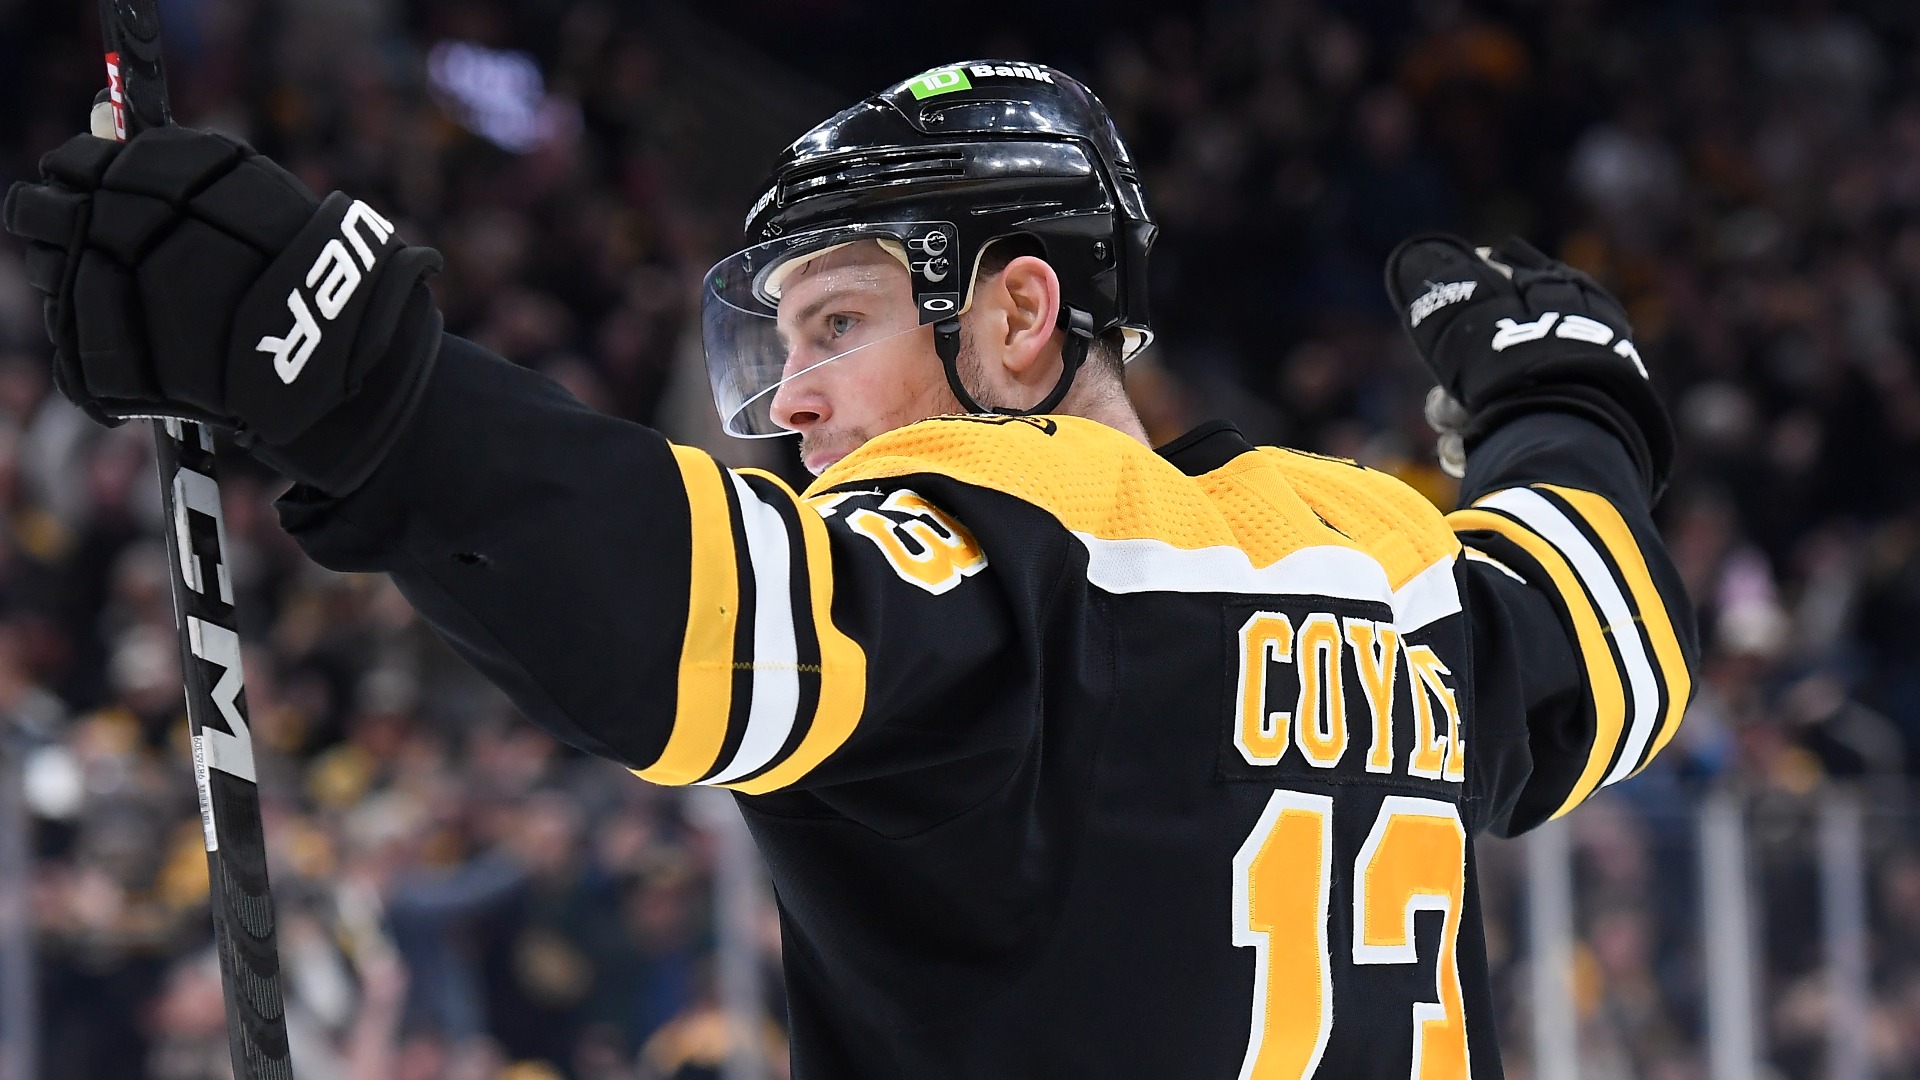 Coyle 'Excited' To Finally Get Winter Classic Moment With Bruins